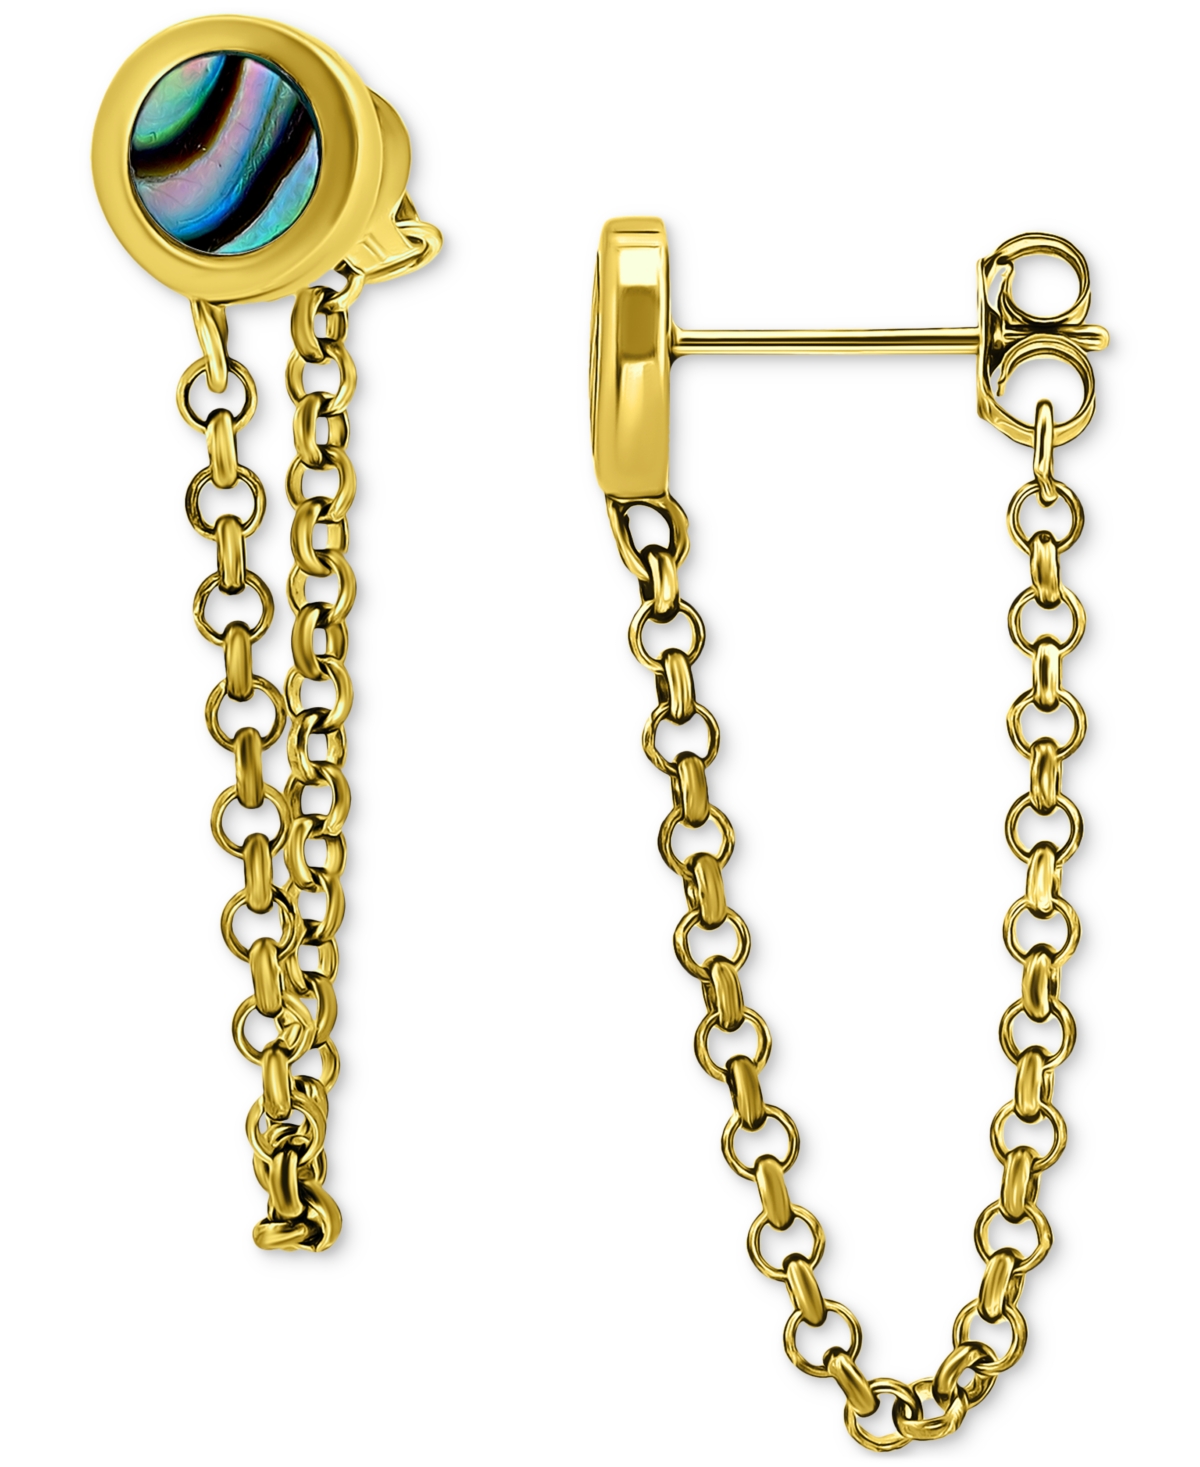 Abalone Chain Front and Back Drop Earrings in 18k Gold-Plated Sterling Silver (Also in Pink Shell), Created for Macy's - Abalone